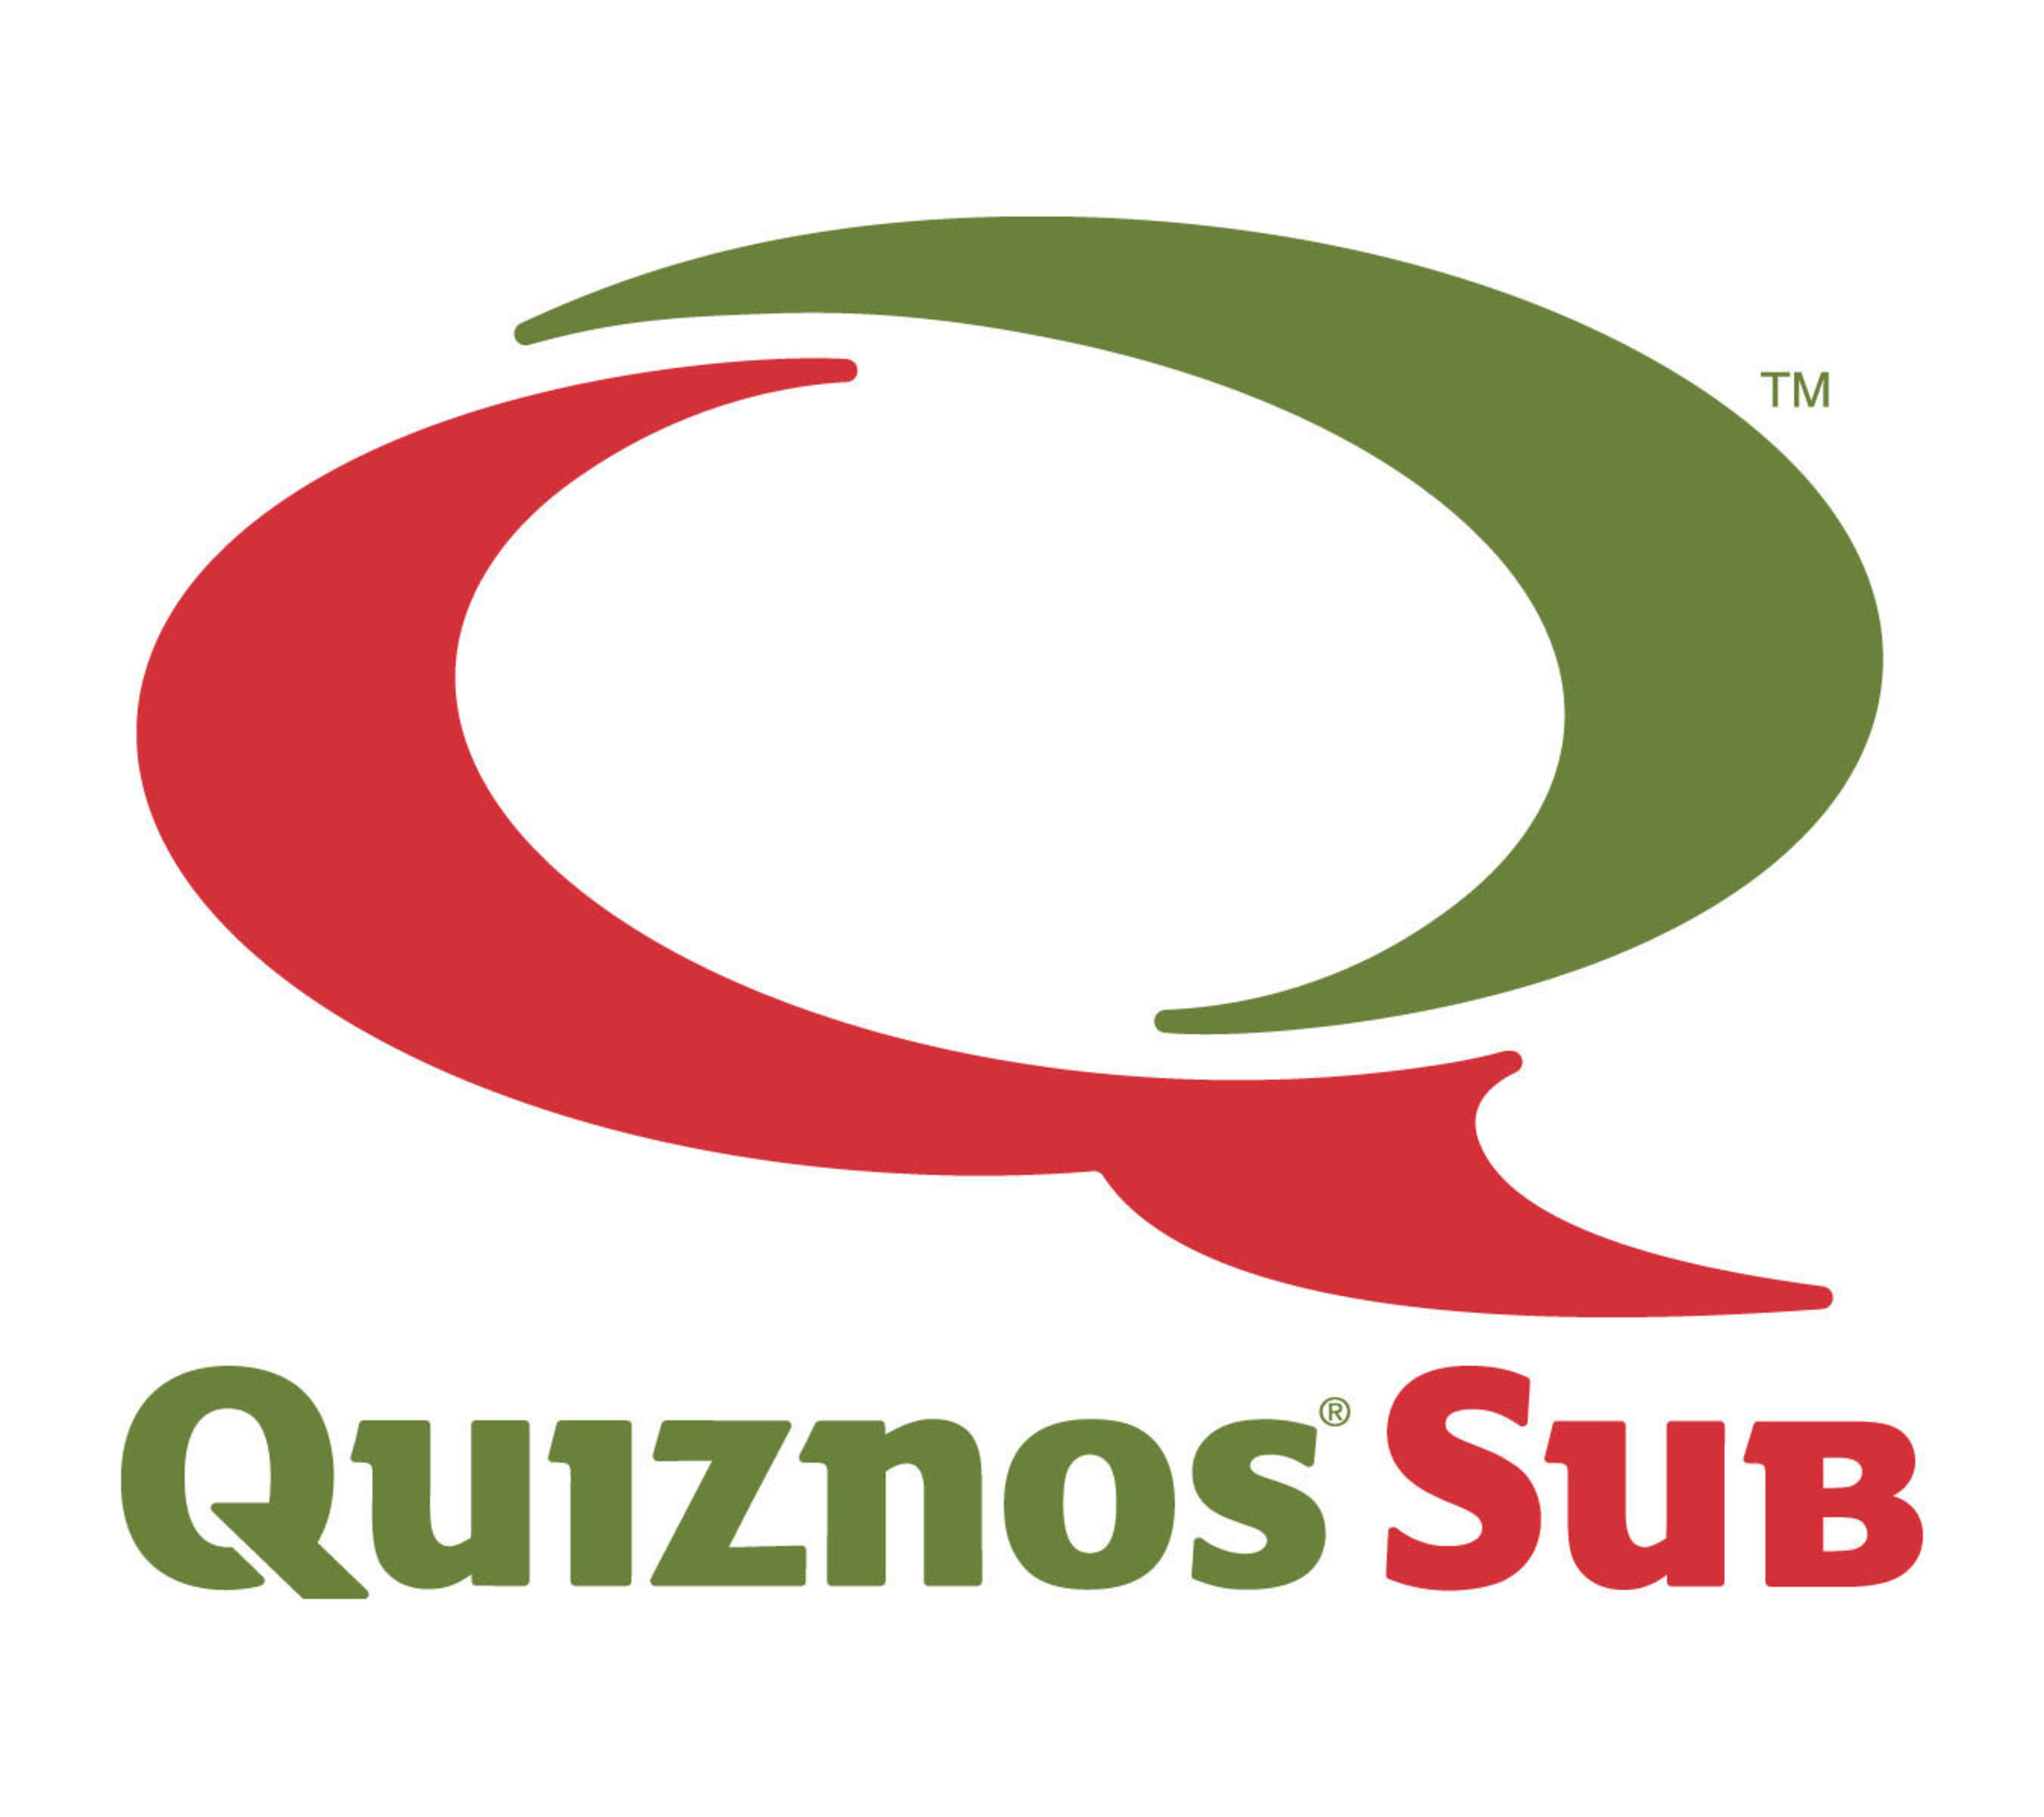 Quiznos continues to expand its industry-leading international development with growth into seven countries in Asia and the Middle East.